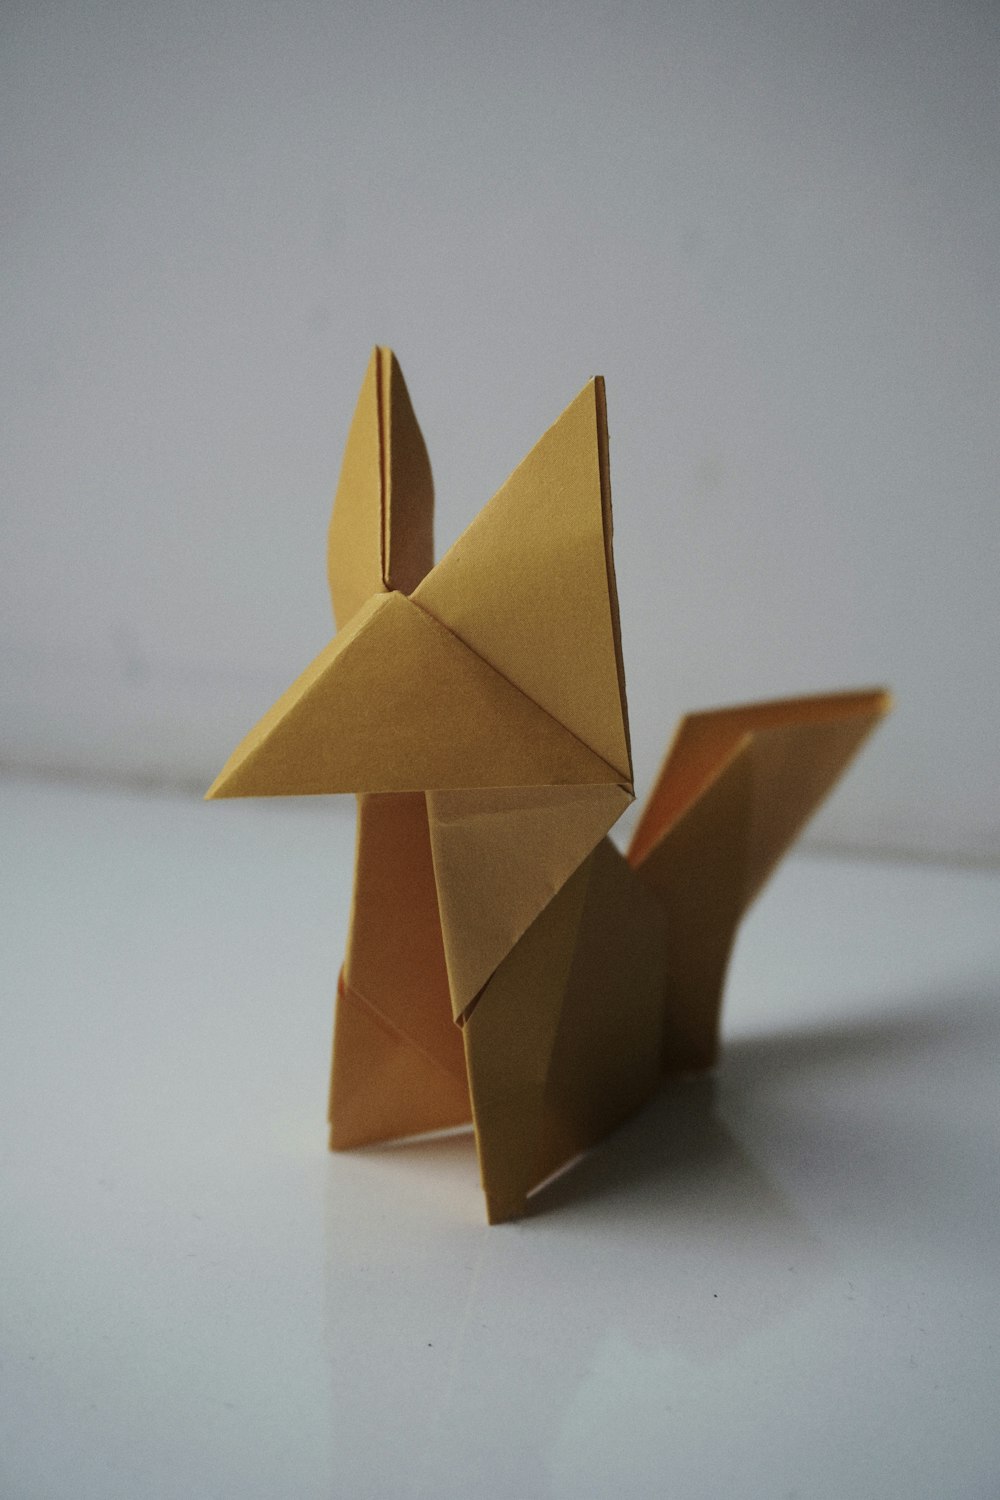 an origami animal made out of gold paper